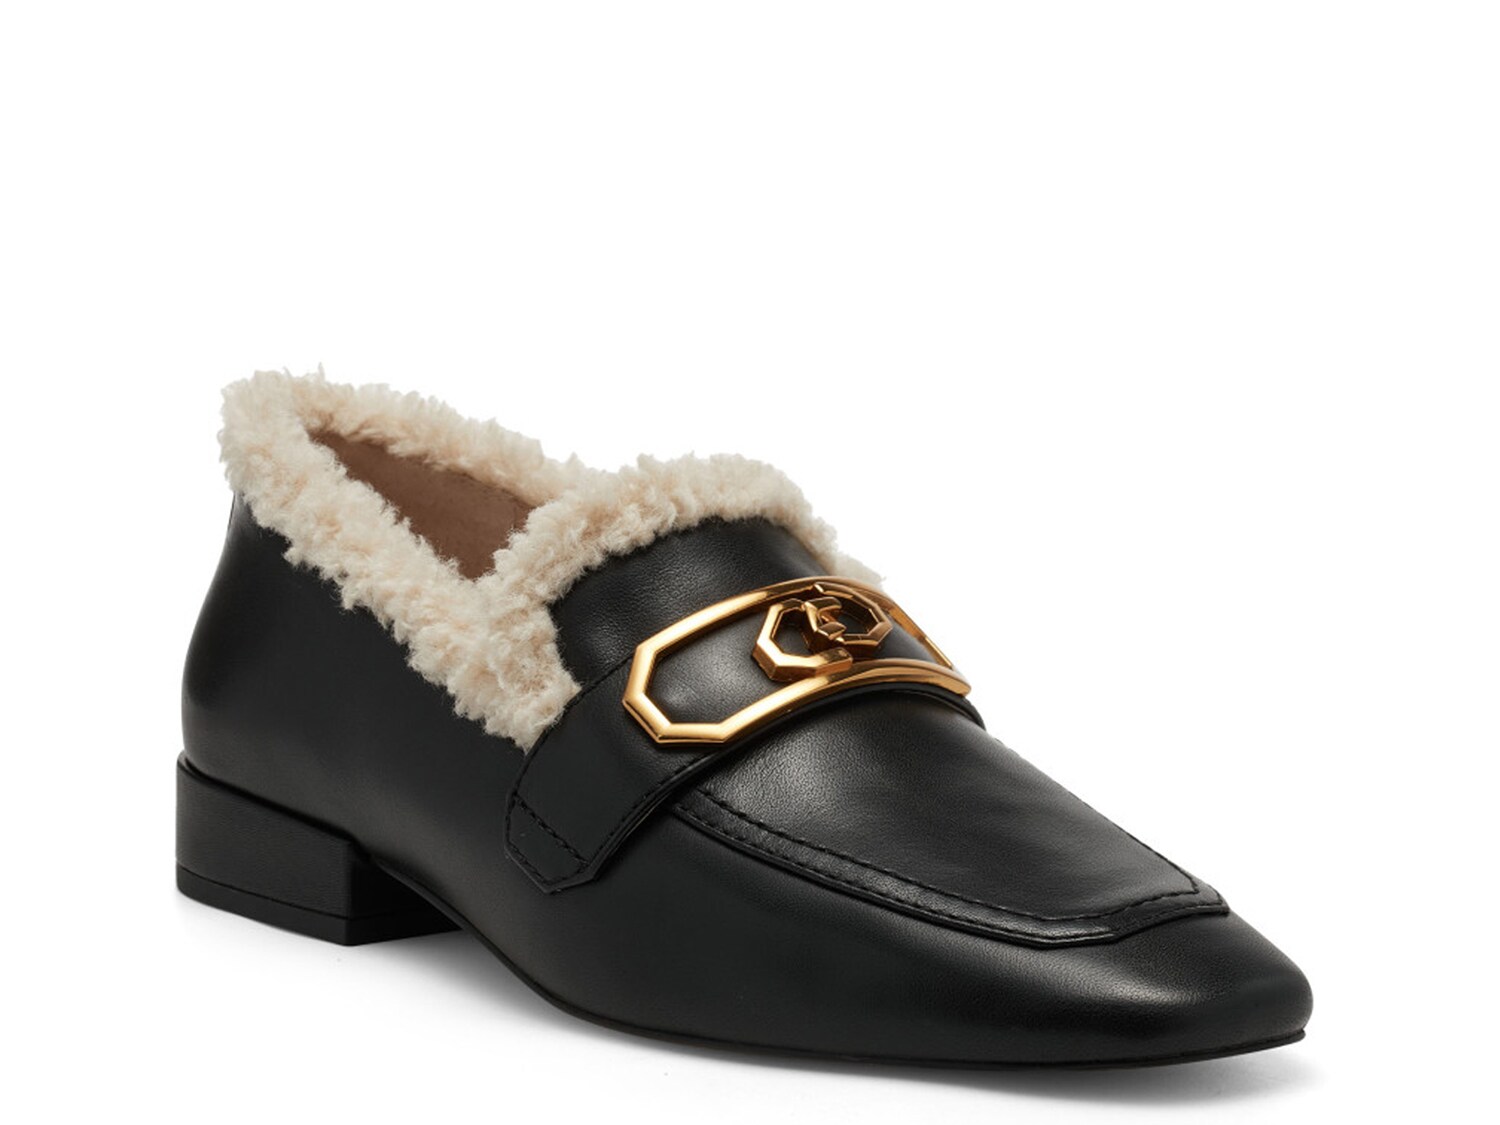 Louise et Cie Leather Loafer Pumps - Ovidio 